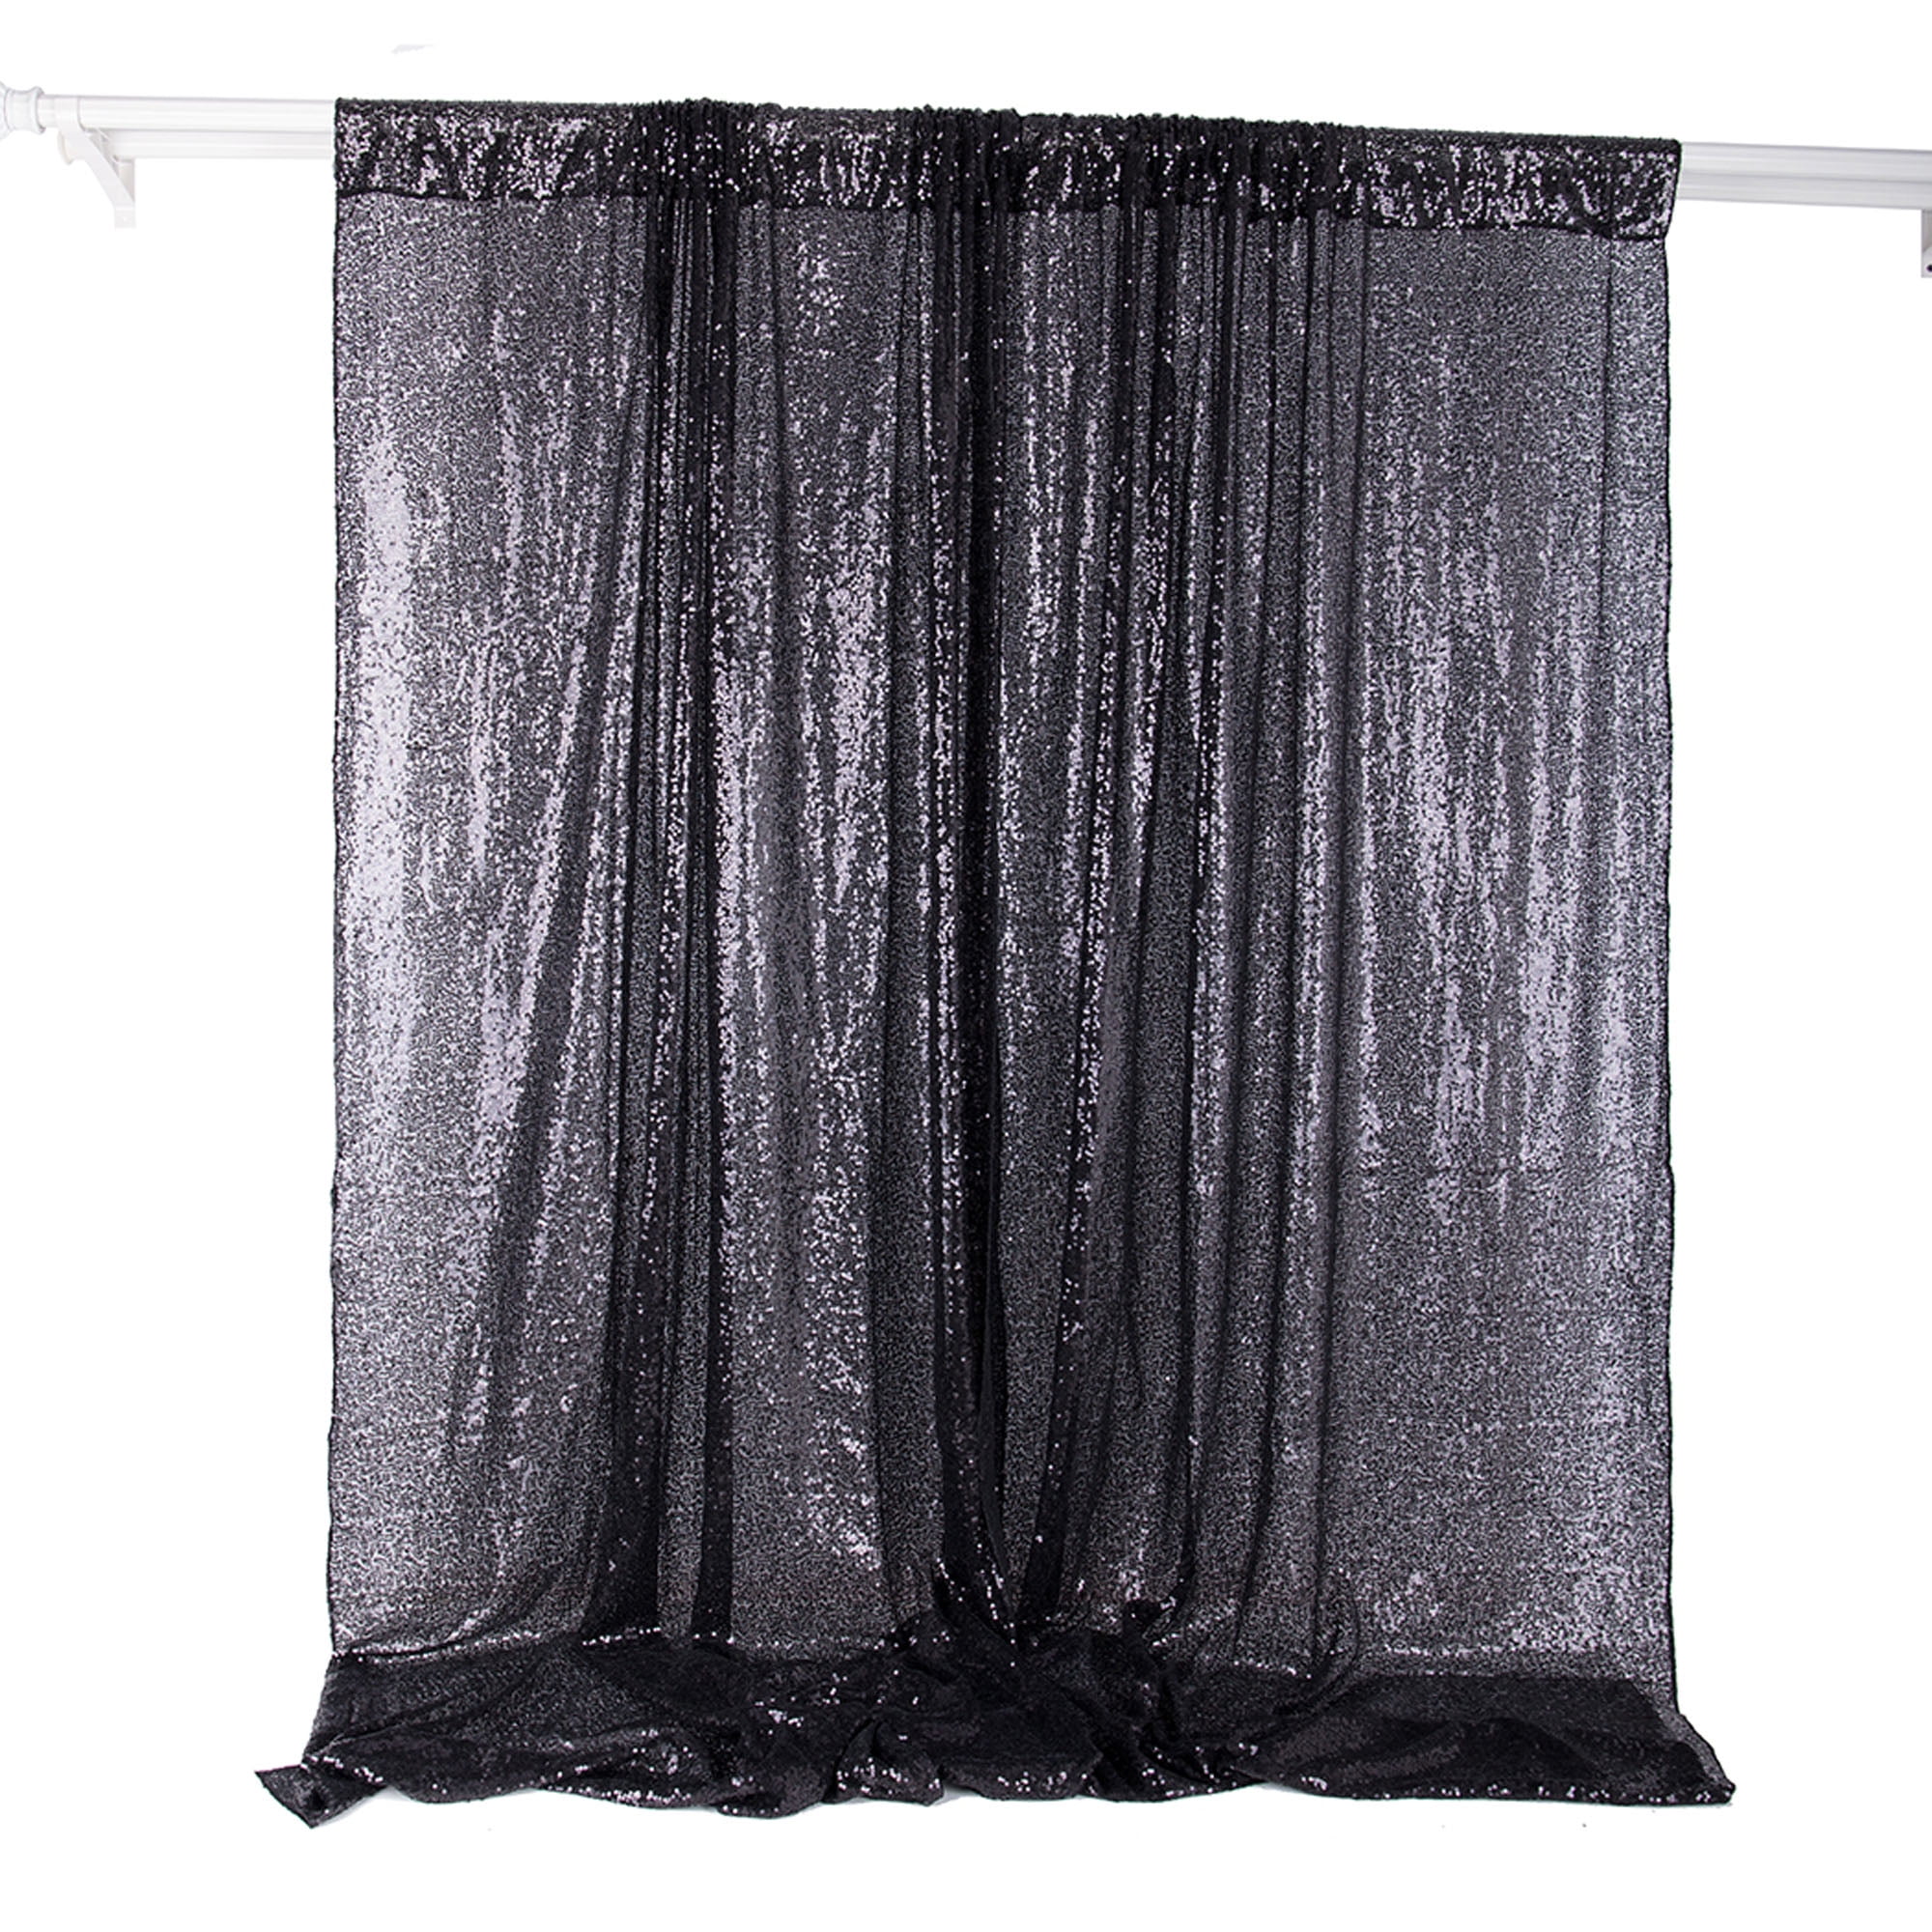 Silver Glitter Backdrop Curtain 4ftx6ft Sequin Photo Booth Backdrop Drapes Party Photography Backdrop Background